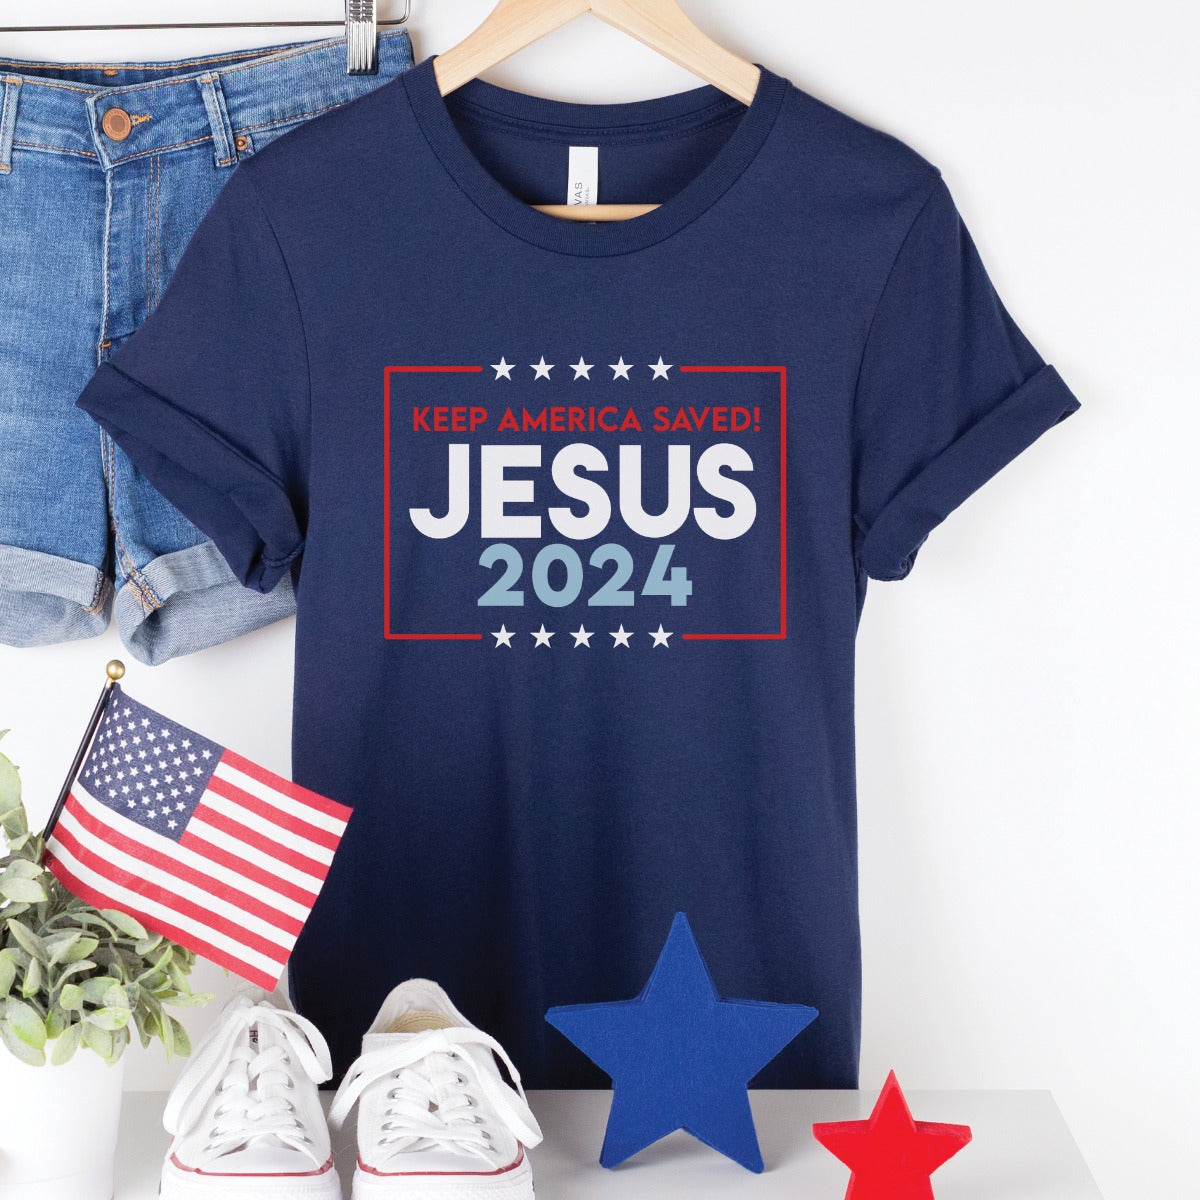 Patriotic navy blue Bella Canvas 3001 Presidential election vote unisex Christian t-shirt, Jesus 2024 Keep America Saved" in bold red, white, and blue fonts, made in the USA, made for men and women God & Country Patriots